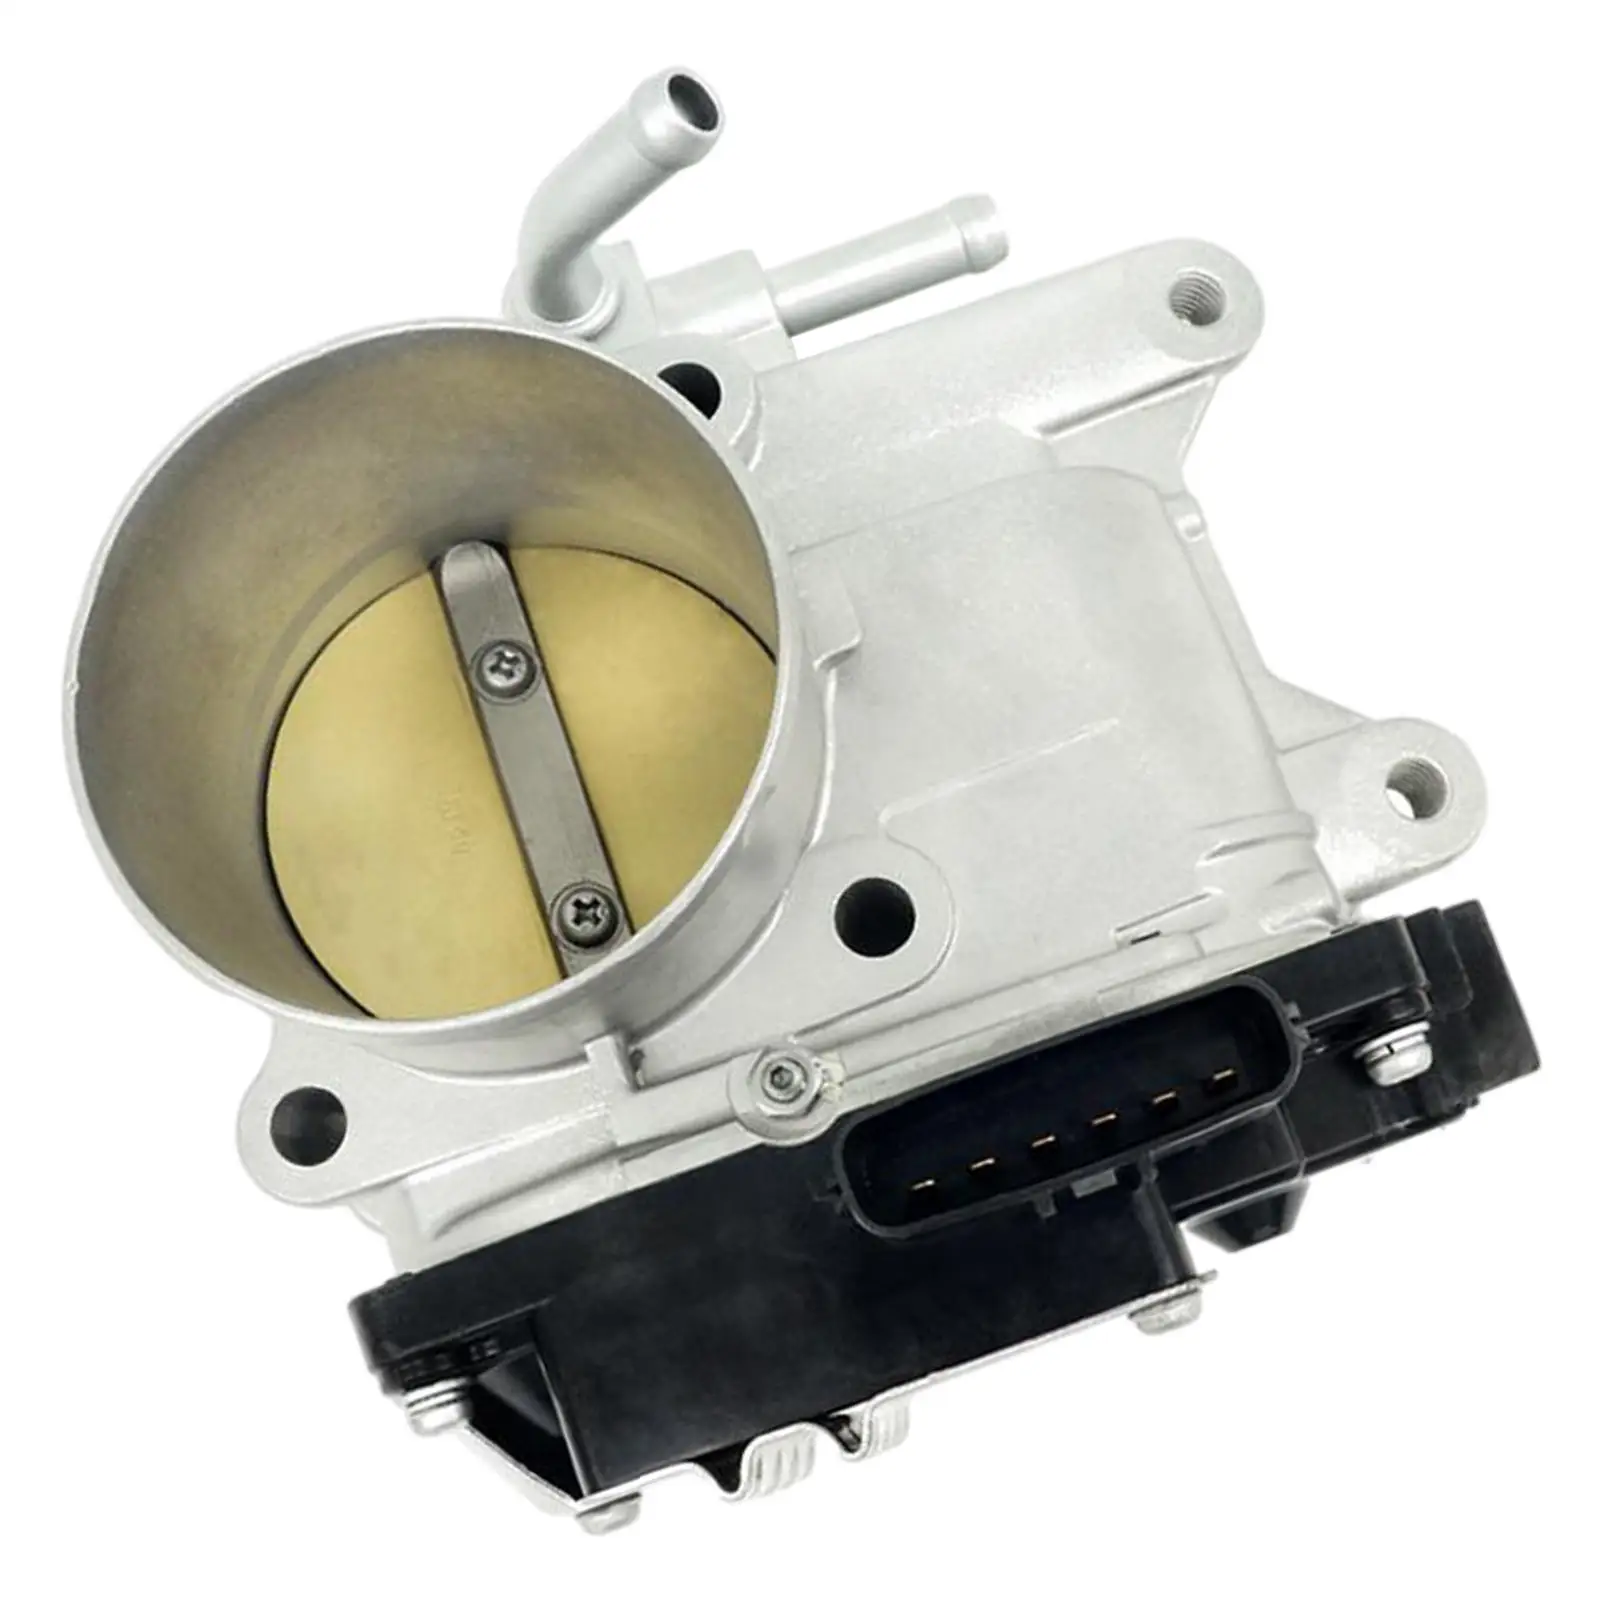 Engine Throttle Body Assy for Mitsubishi Outlander 3.0L Accessories Parts Replacement Easy to Install